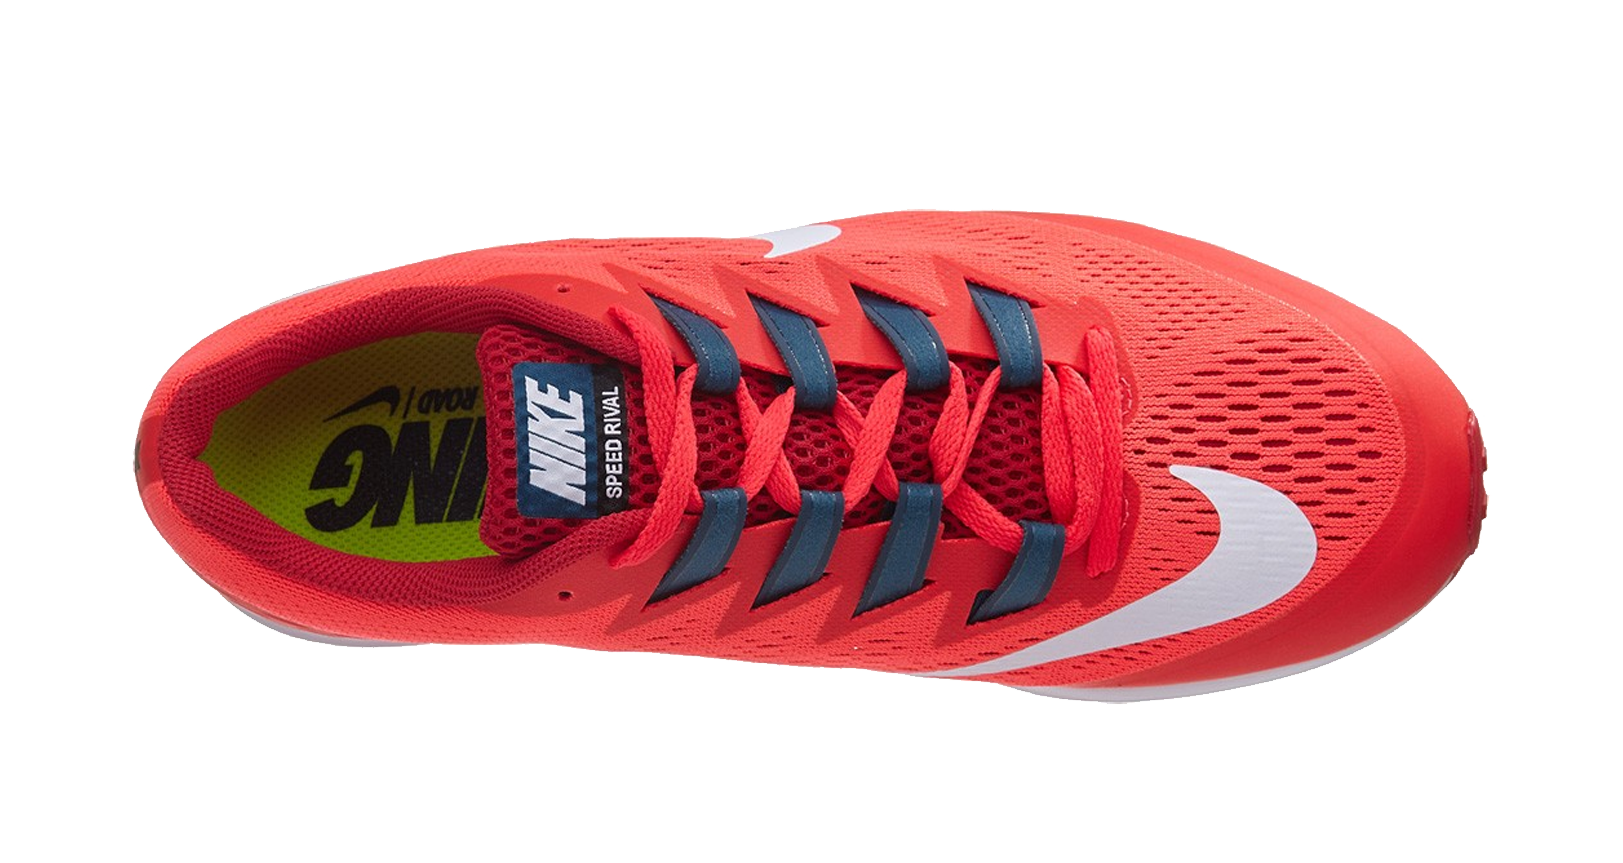 Final viudo llevar a cabo Nike Zoom Speed Rival 6 Running Shoe Review - Believe in the Run